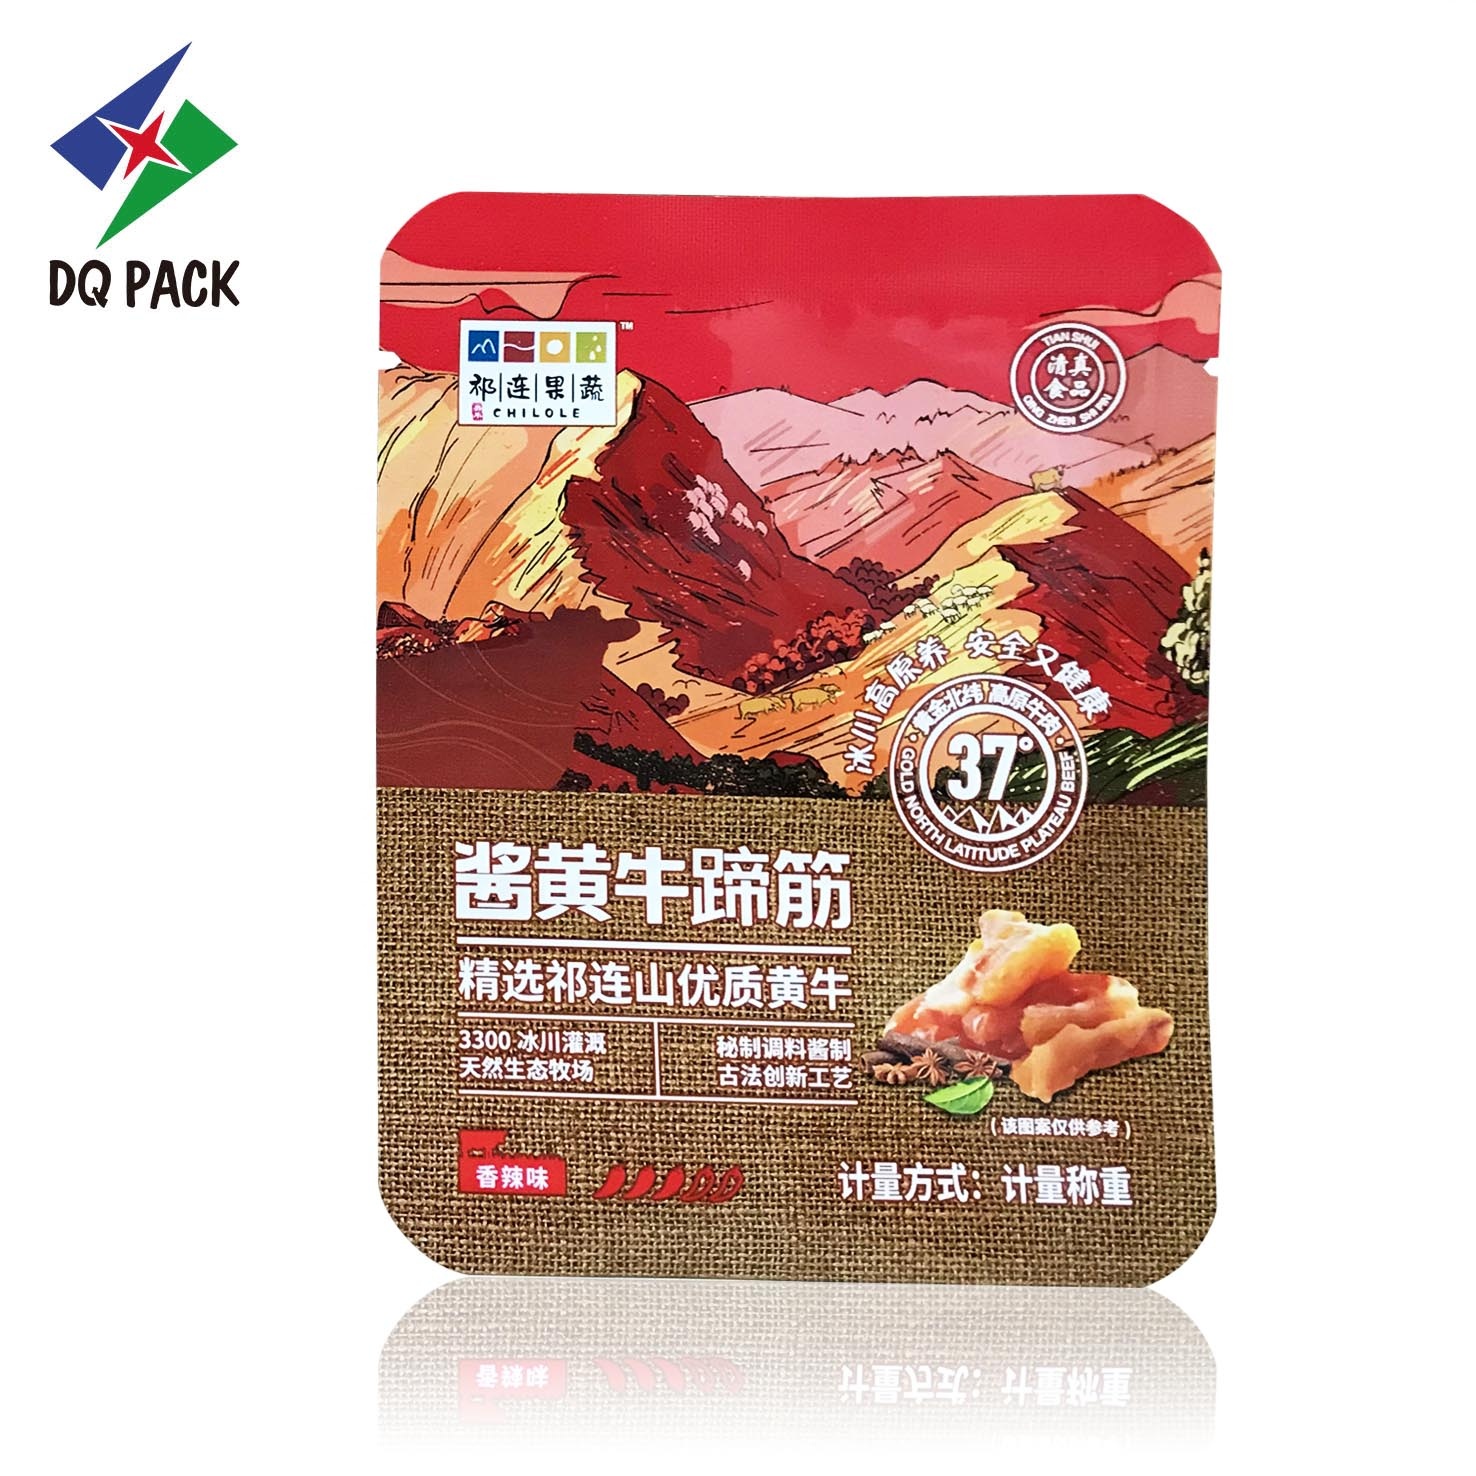 DQ PACK OEM Design Heat Seal 500g Wasabi Stand Up Pouch Plastic Packaging Bag For Sauce